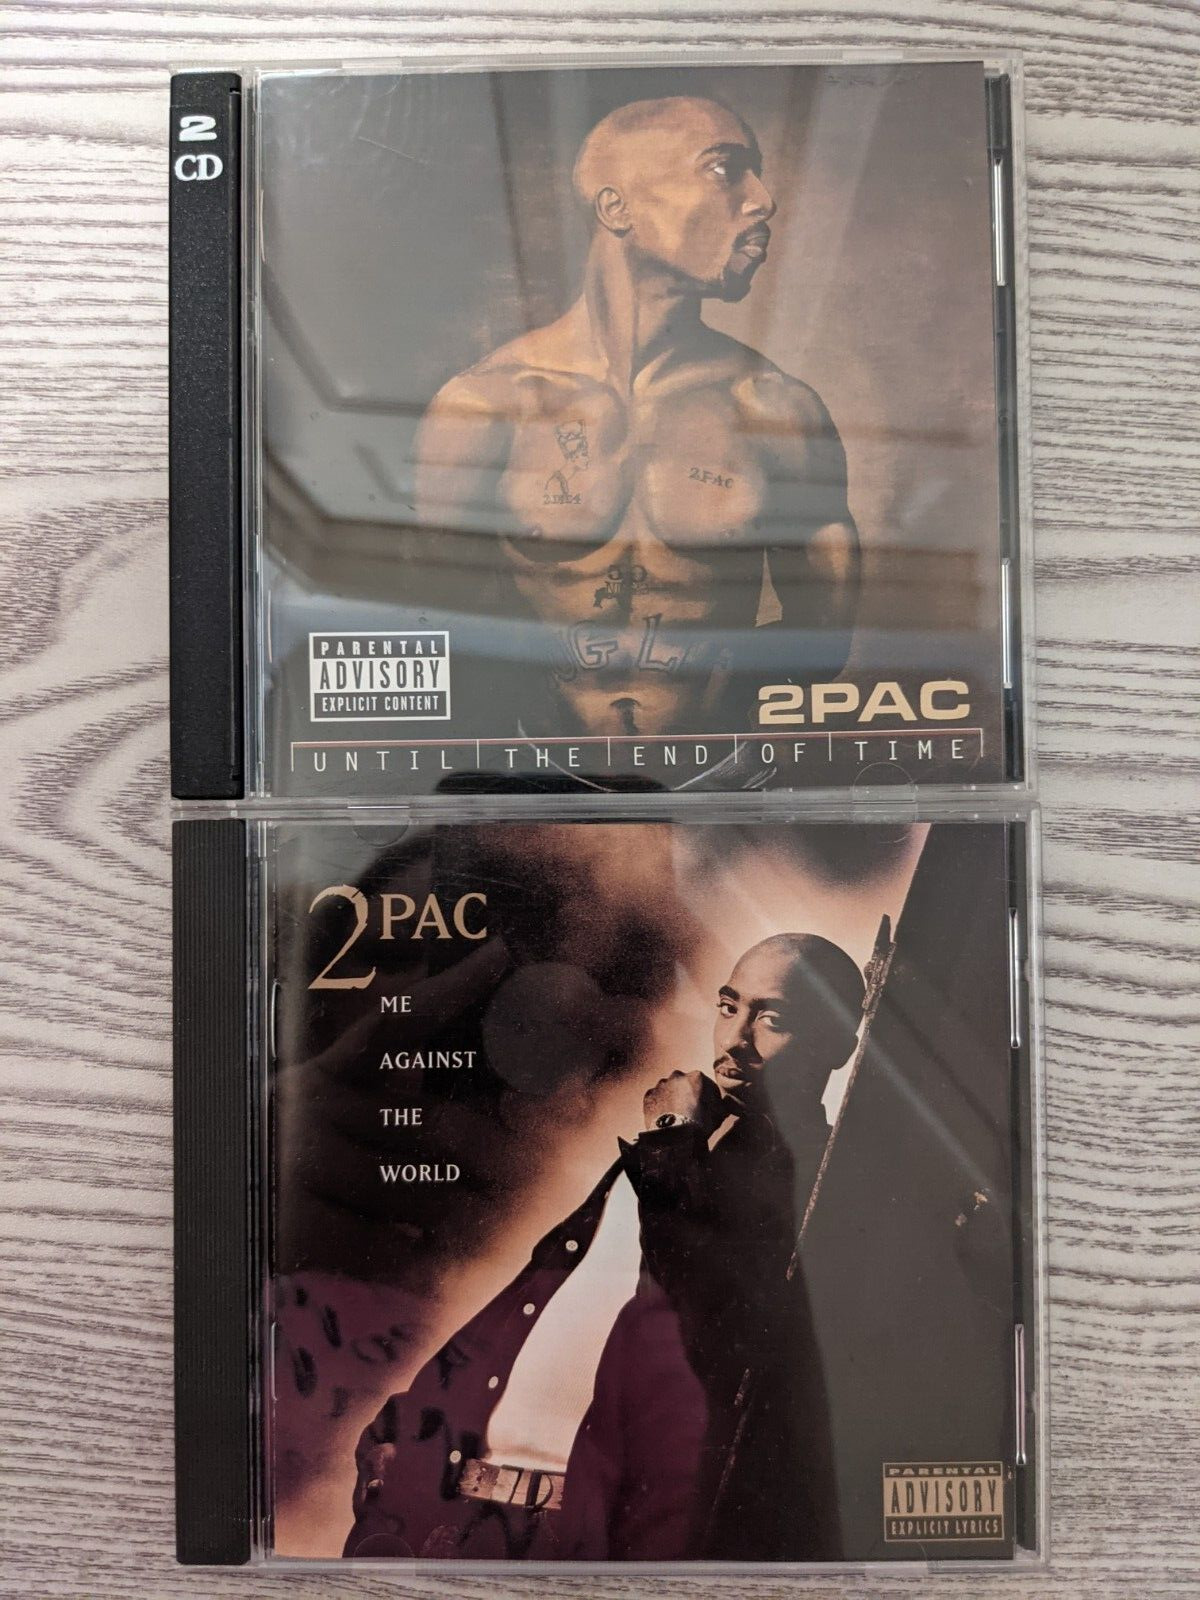 Lot of 2 2Pac CDs 2001 Until the end of time 2 Disc CD 1995 Me Against The World